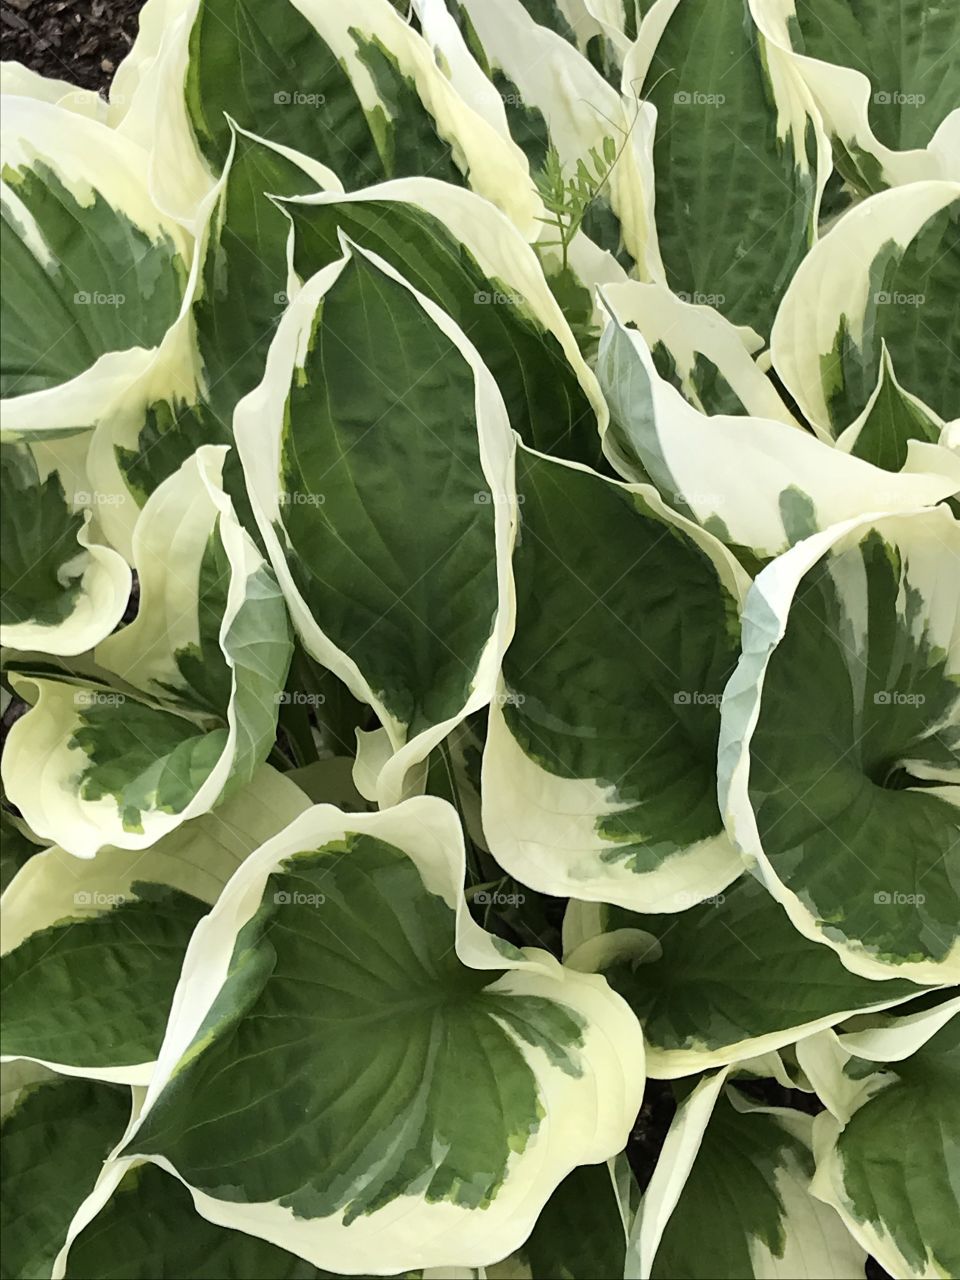 Beautiful hostas make such a great splash of colour in the garden with the green and pale yellow leaves